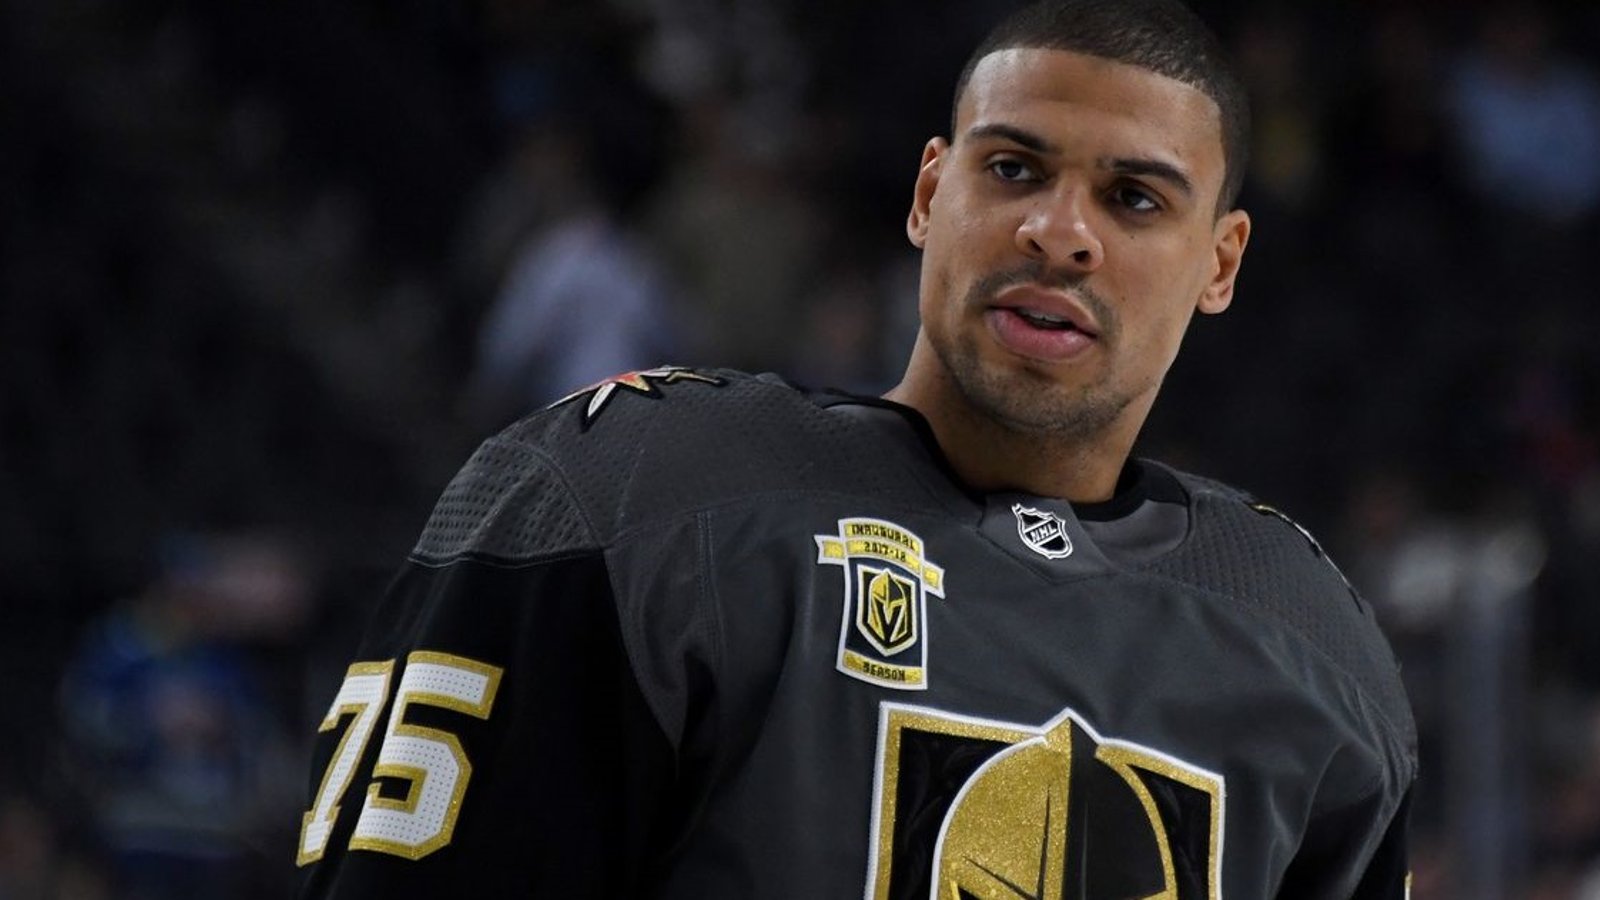 Rangers winger Ryan Reaves discovers the history behind the family name